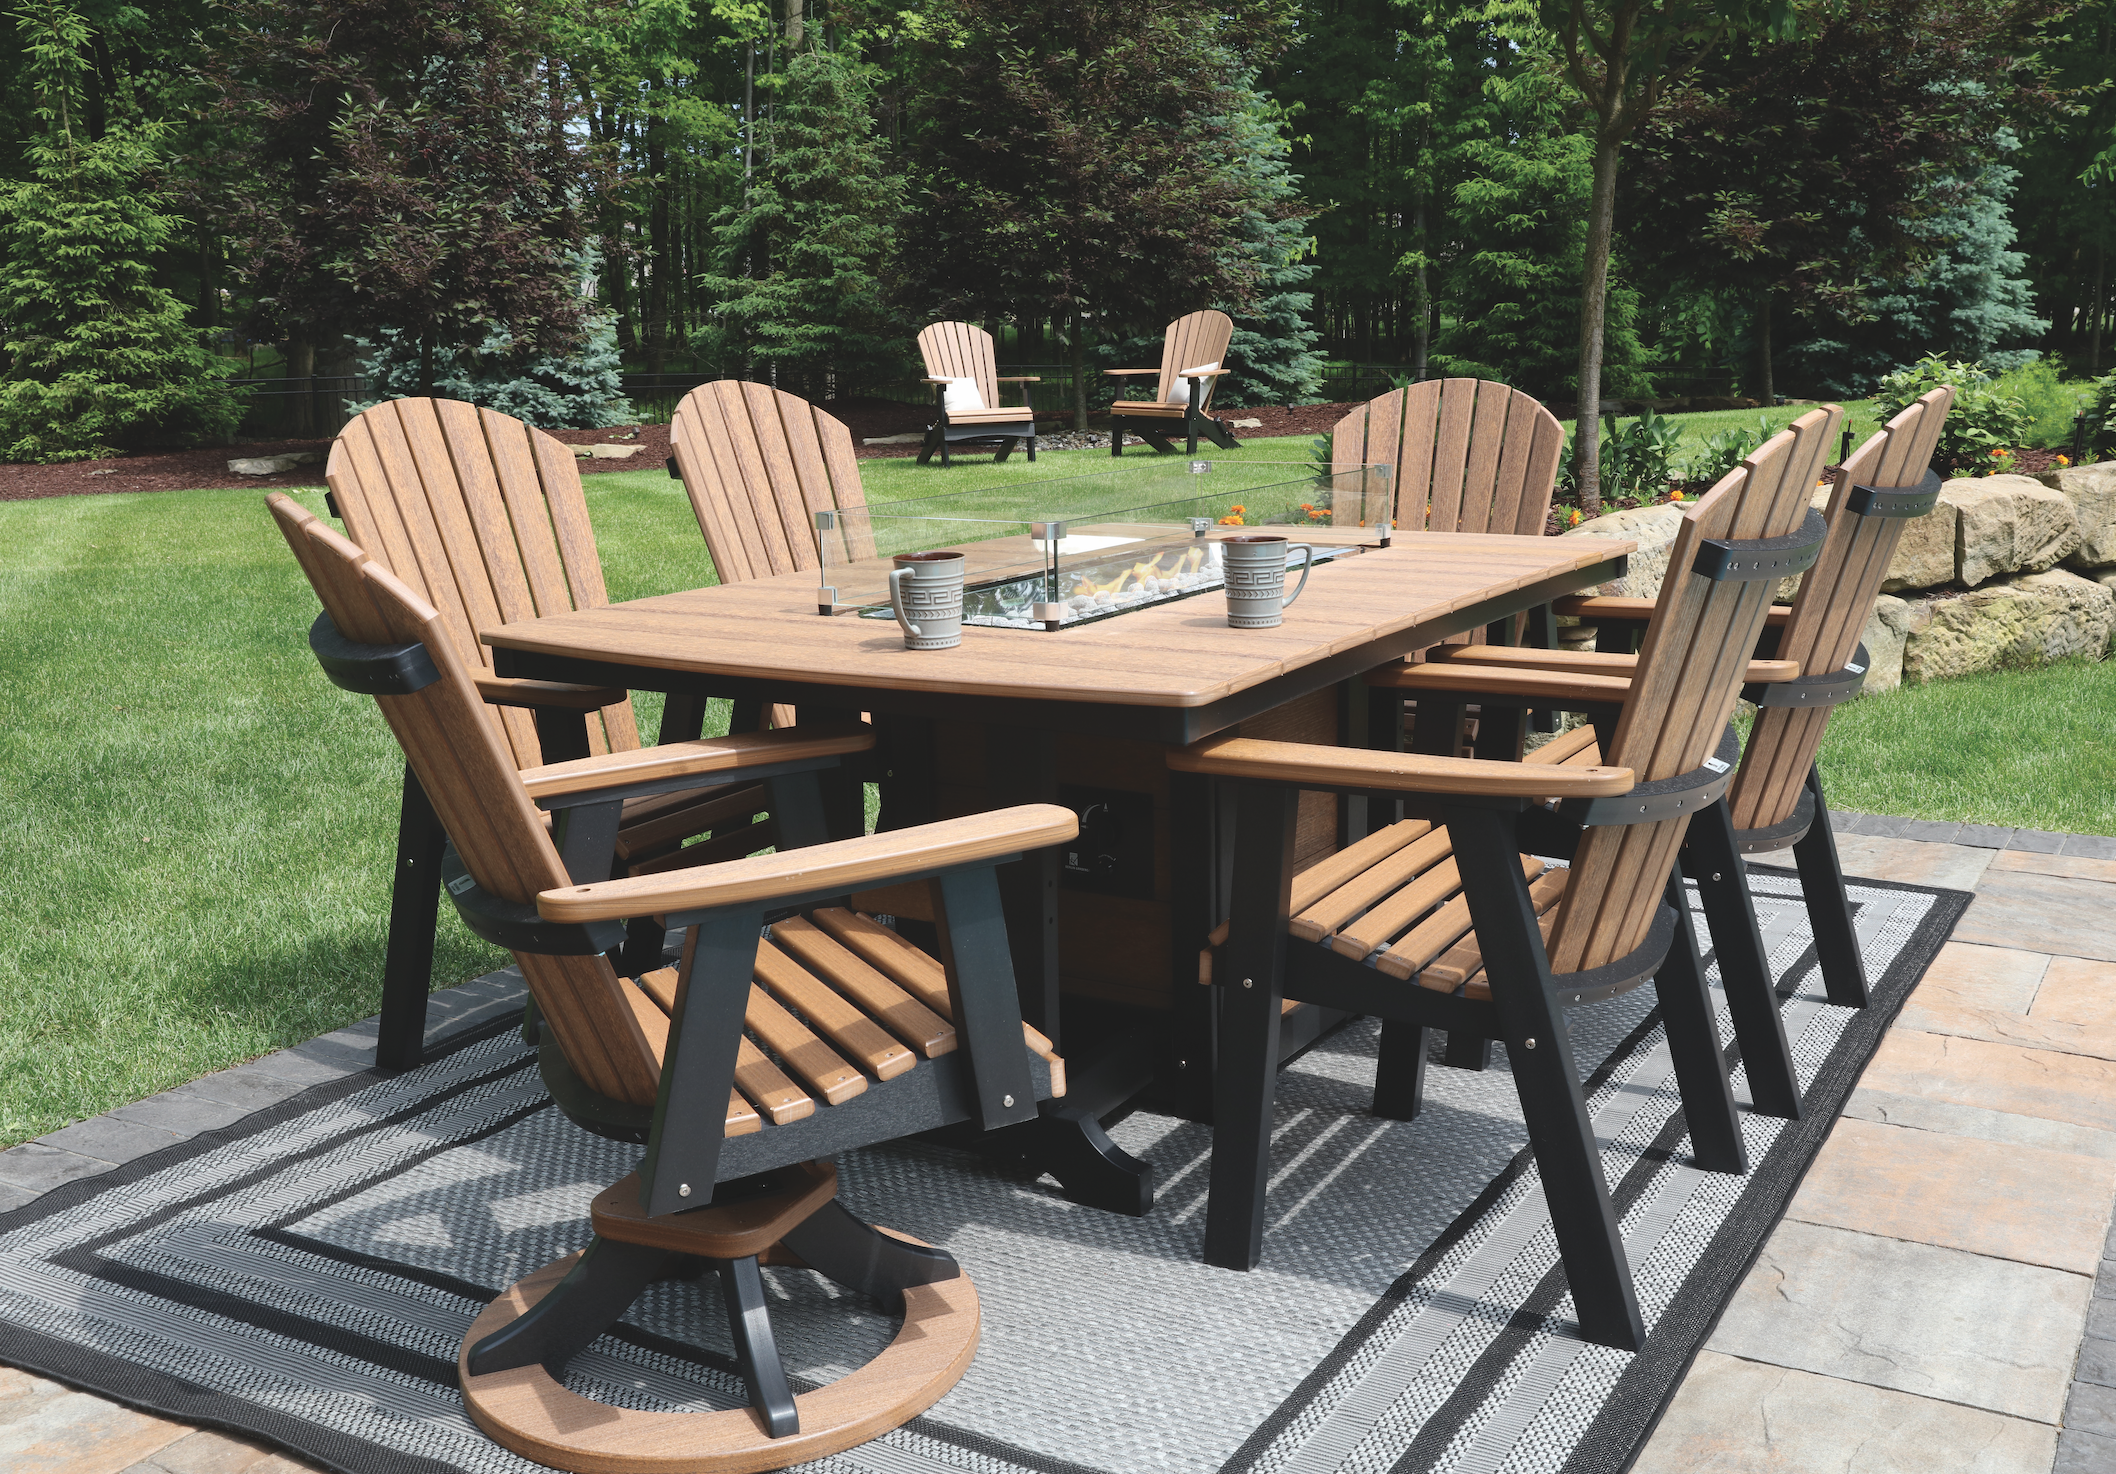  Garden classic 44” x 72” rectangular fire table (dining height), comfo dining chairs, comfo swivel rocker dining chairs in antique mahogany on black. 